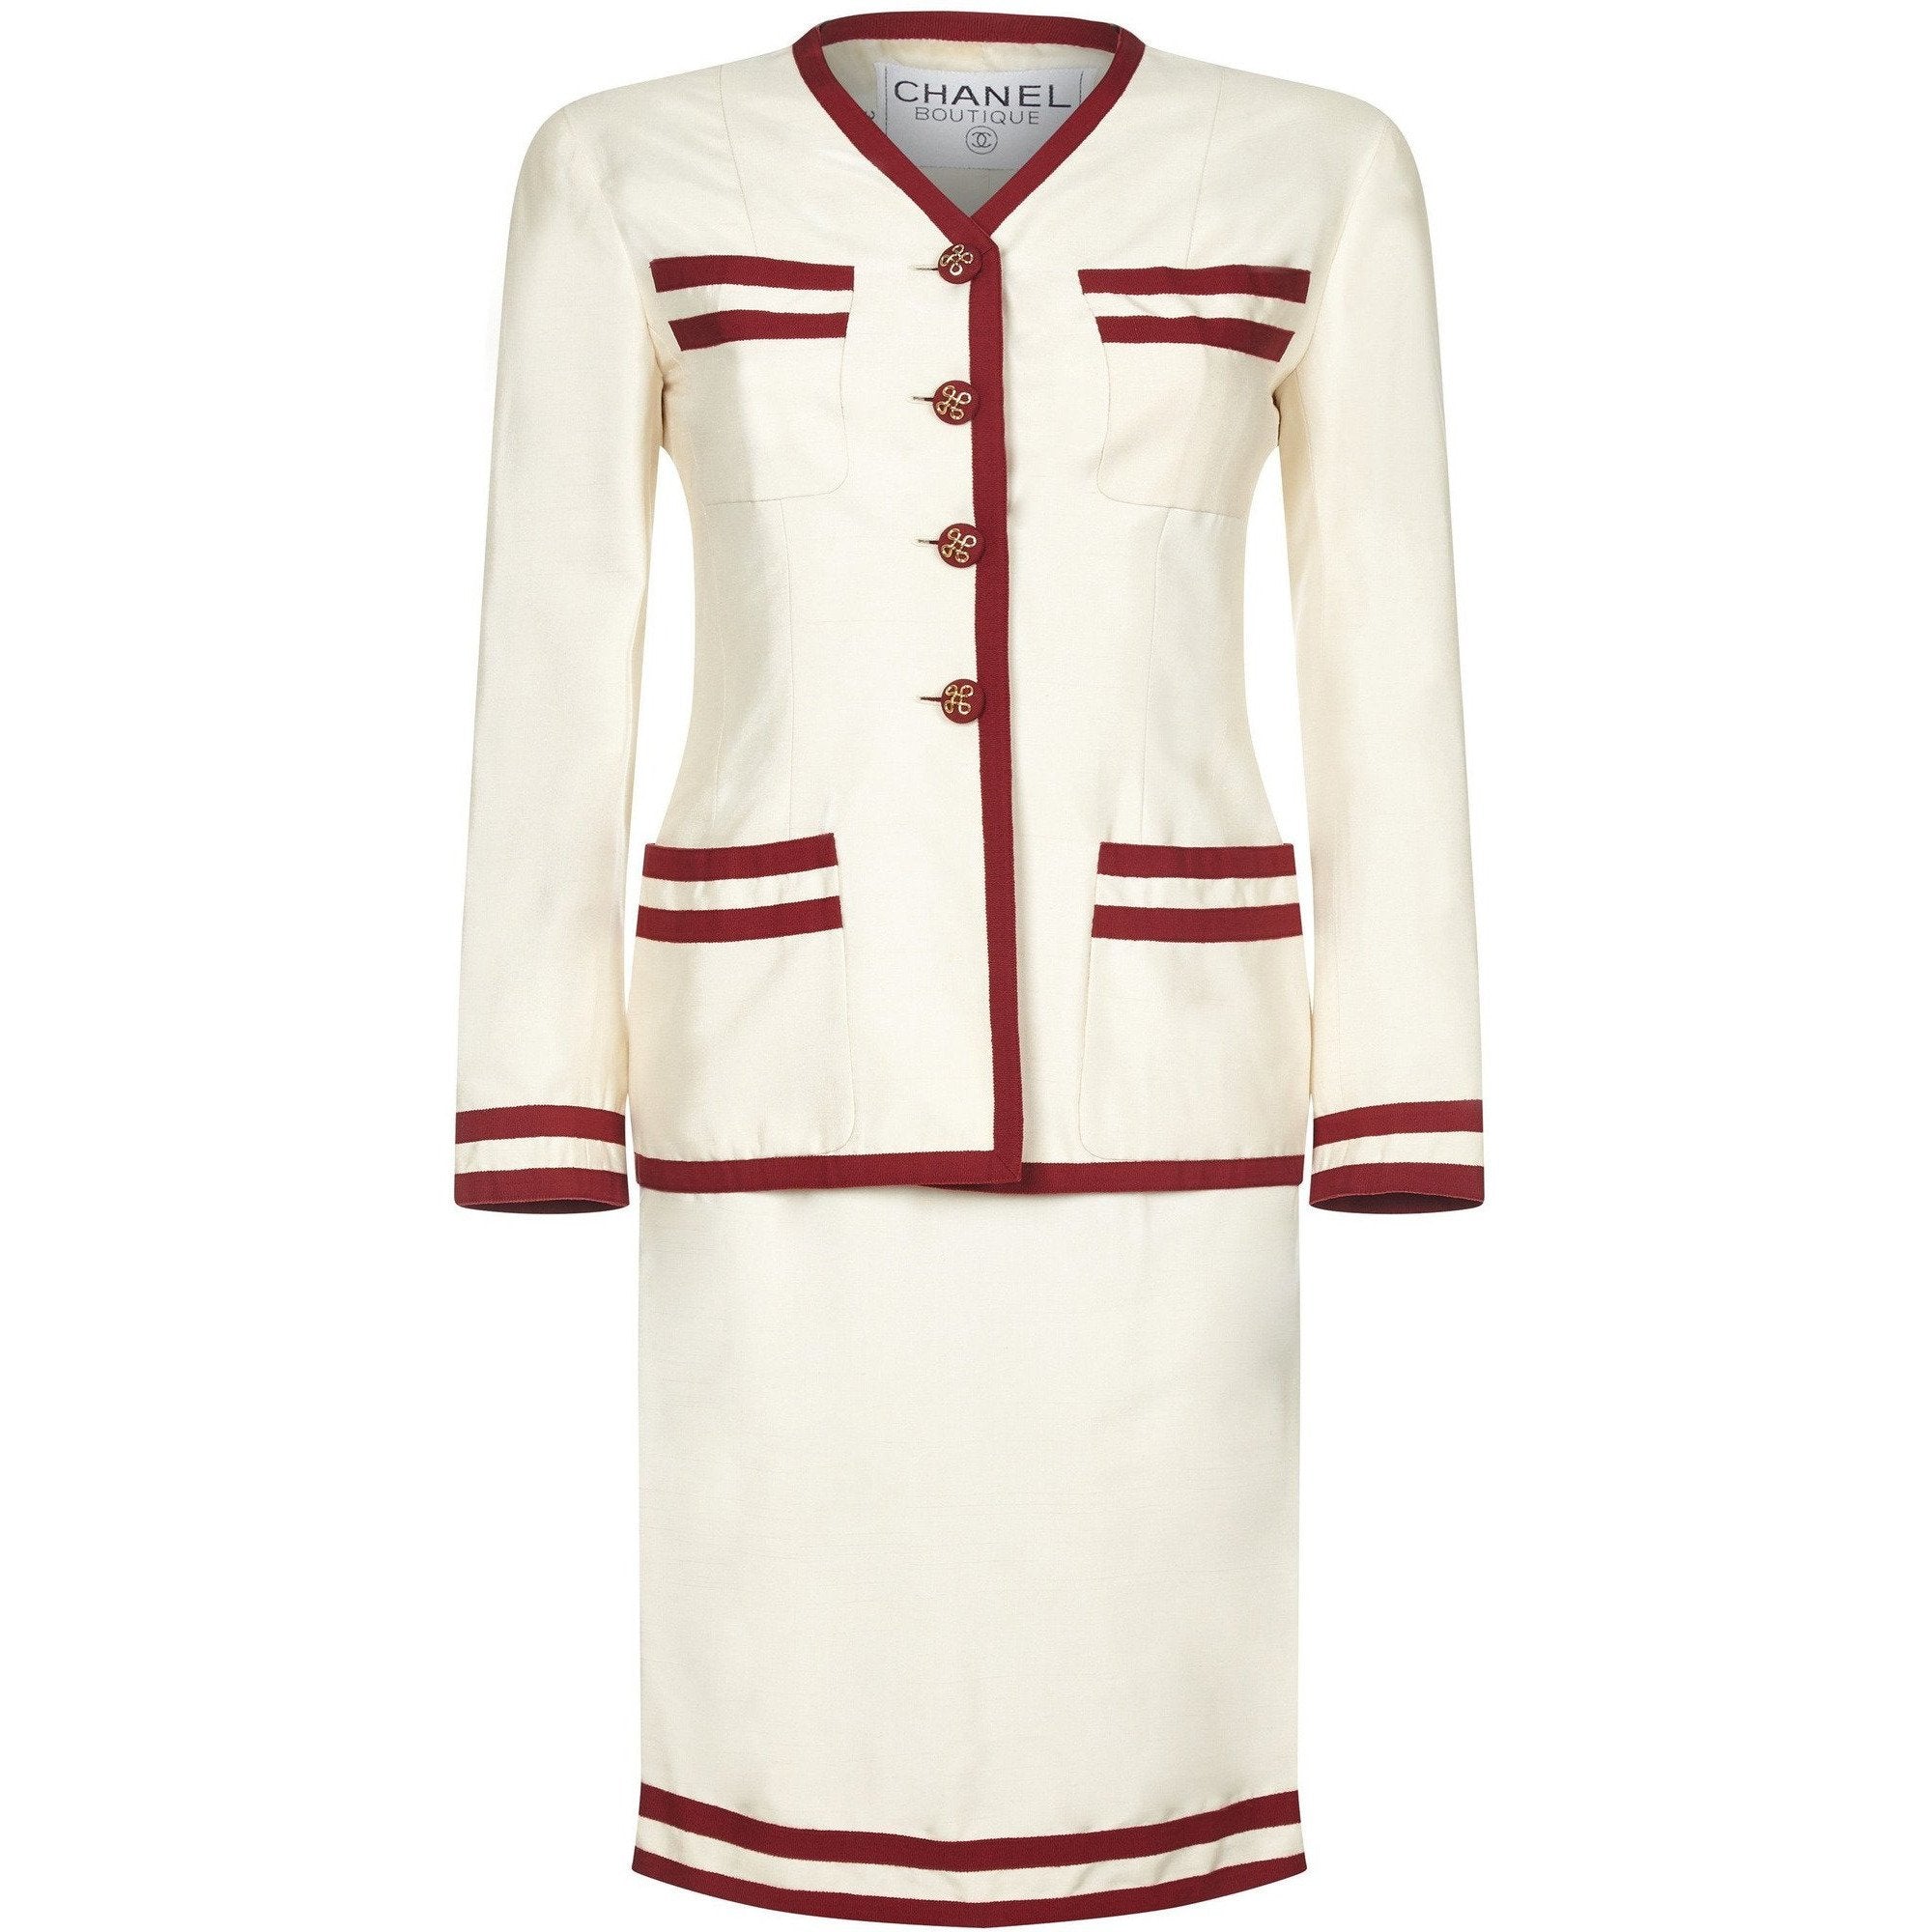 ARCHIVE - Chanel 1990s Cream Silk Suit with Red Trim